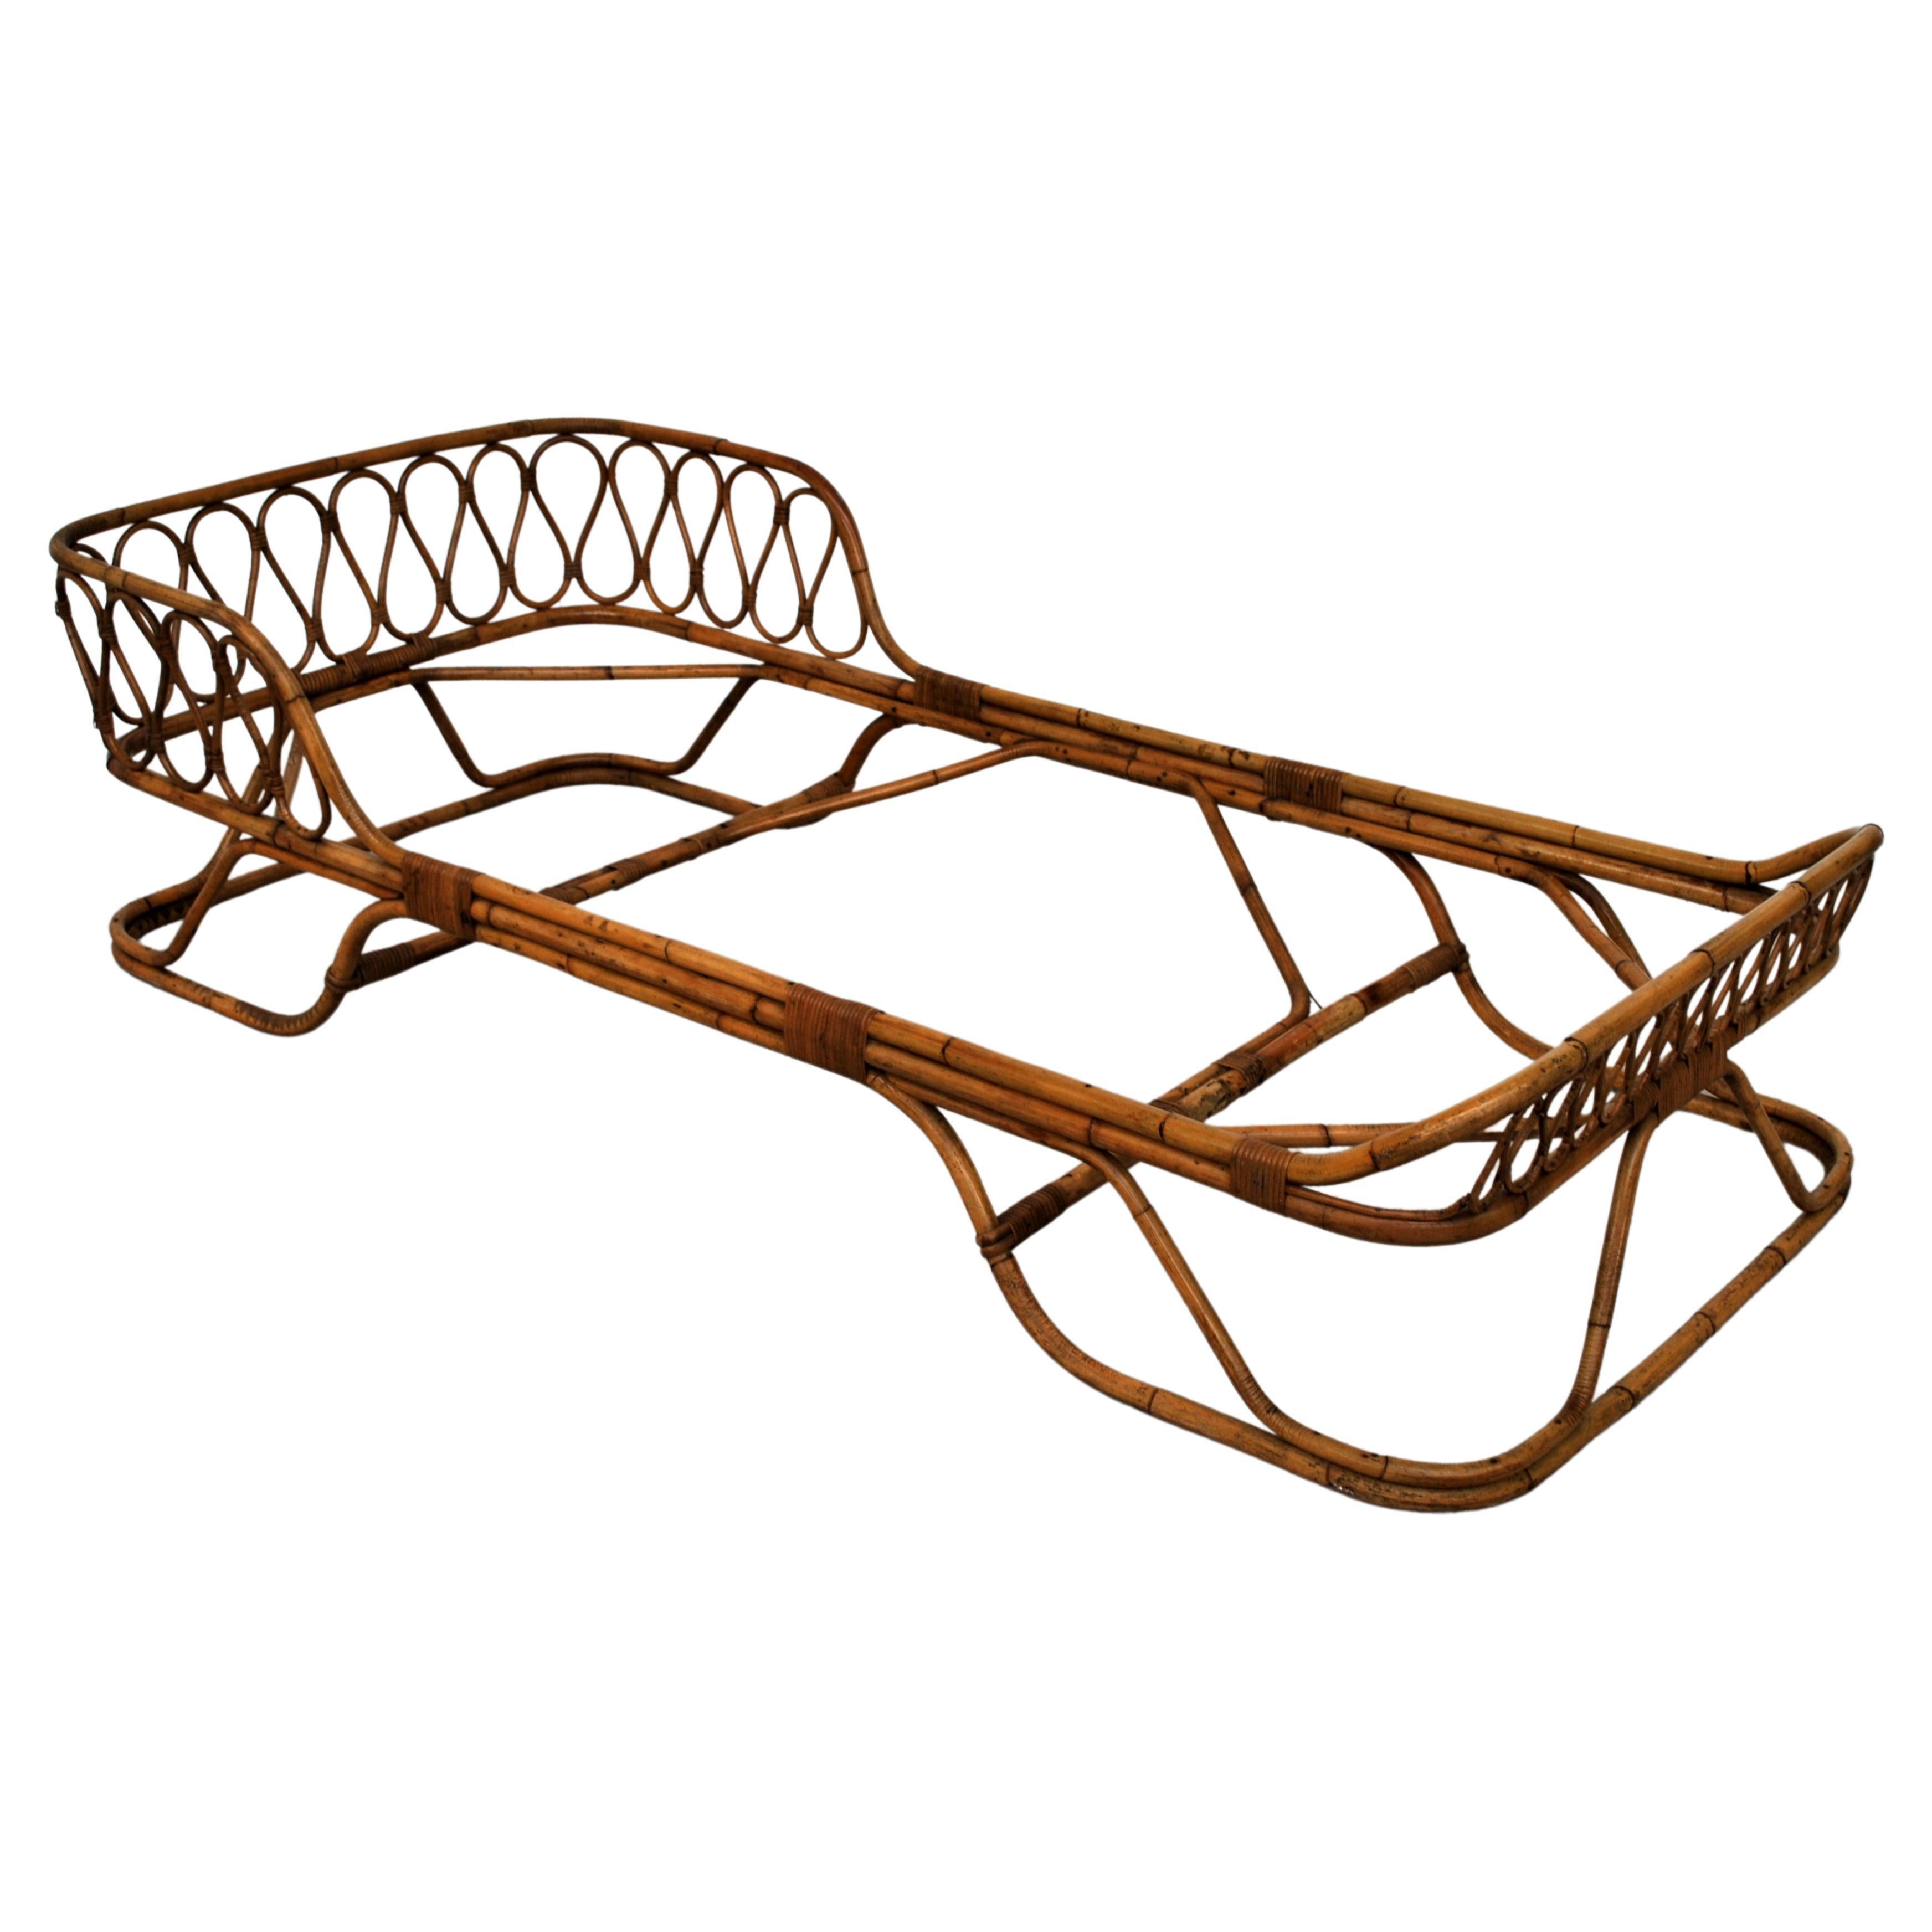 Bamboo Bed by Tito Agnoli for Bonacina, Italy, 50's For Sale